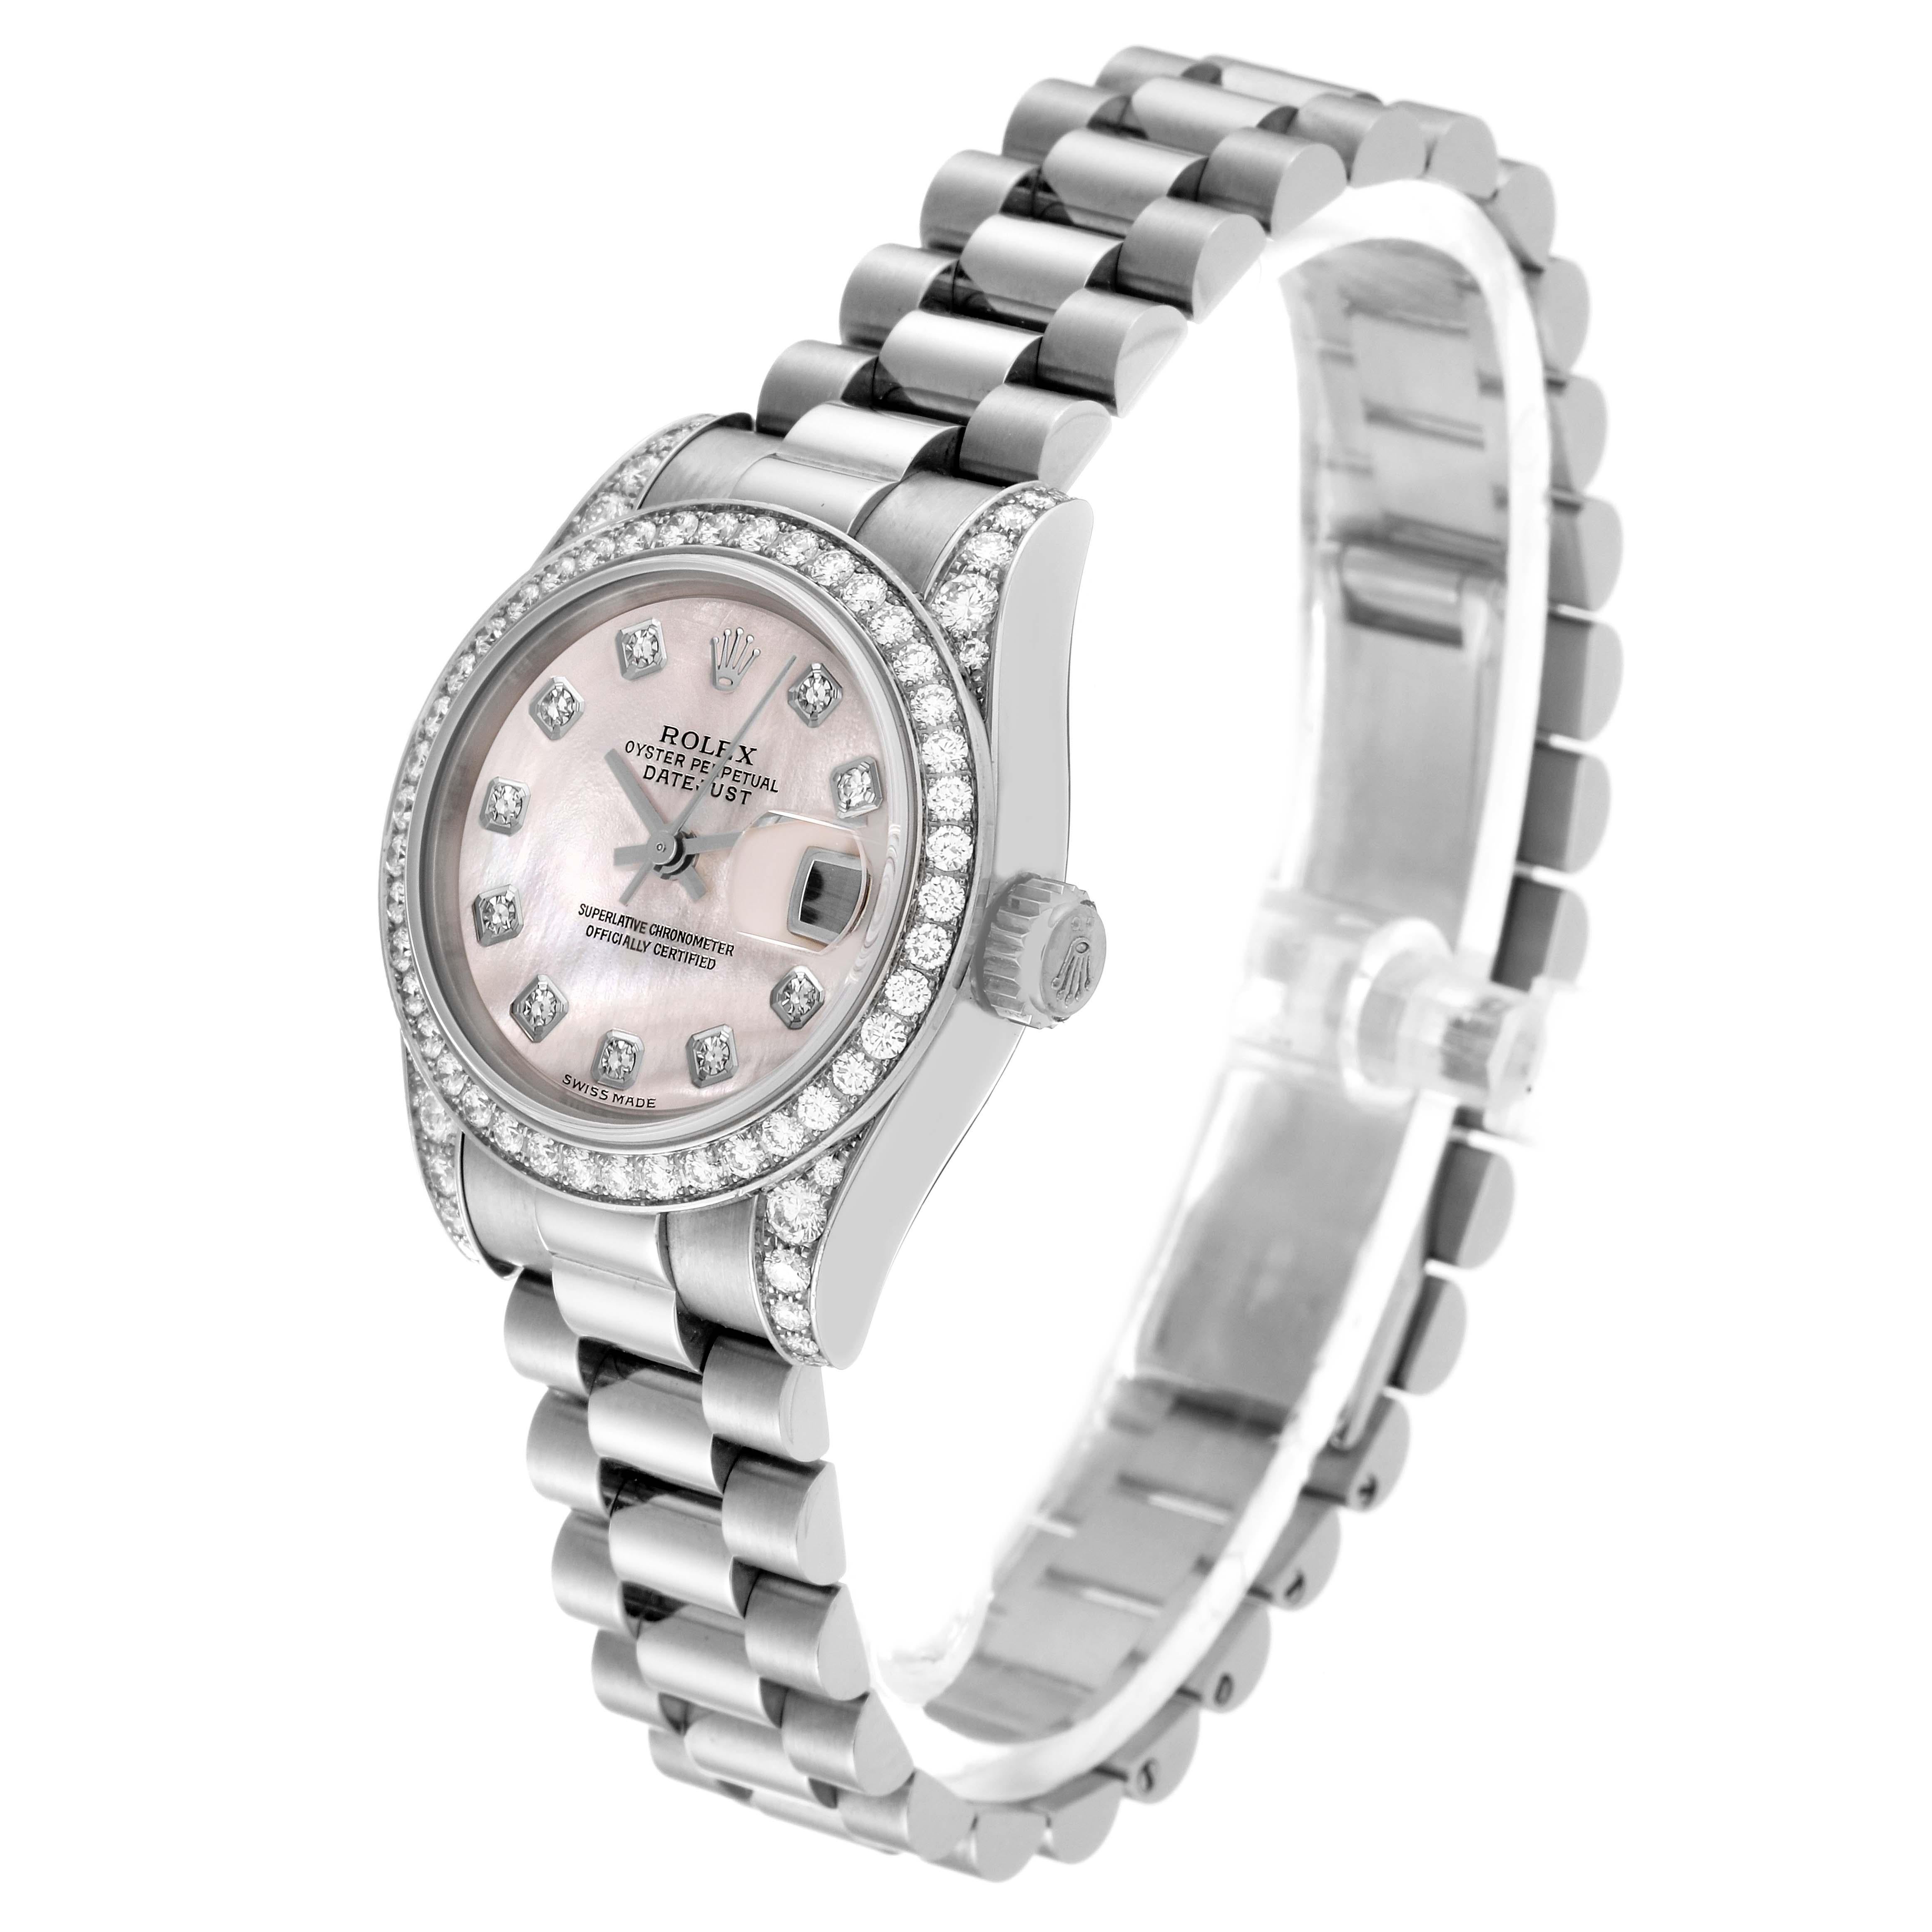 Rolex Datejust President White Gold Mother of Pearl Dial Diamond Watch 179159 For Sale 5